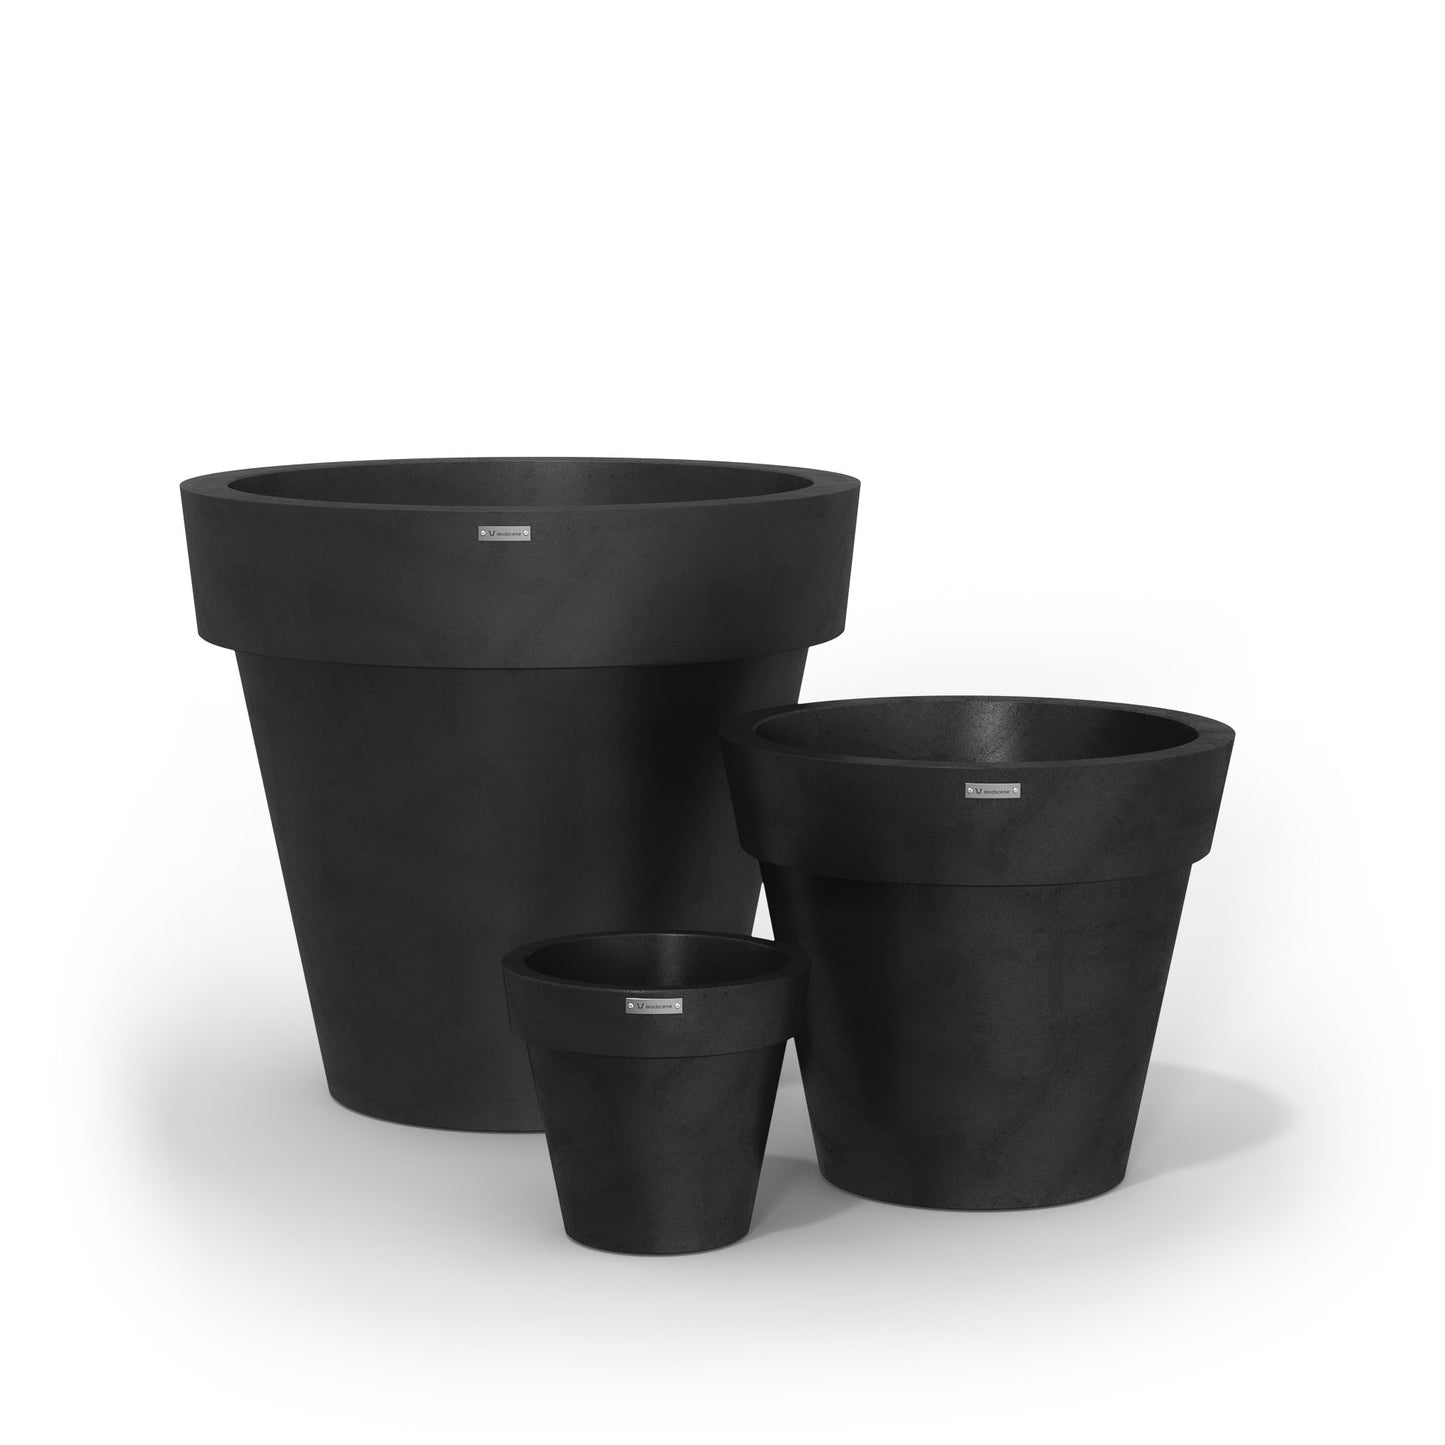 A cluster of three Modscene planters pots in a black colour with a concrete look.